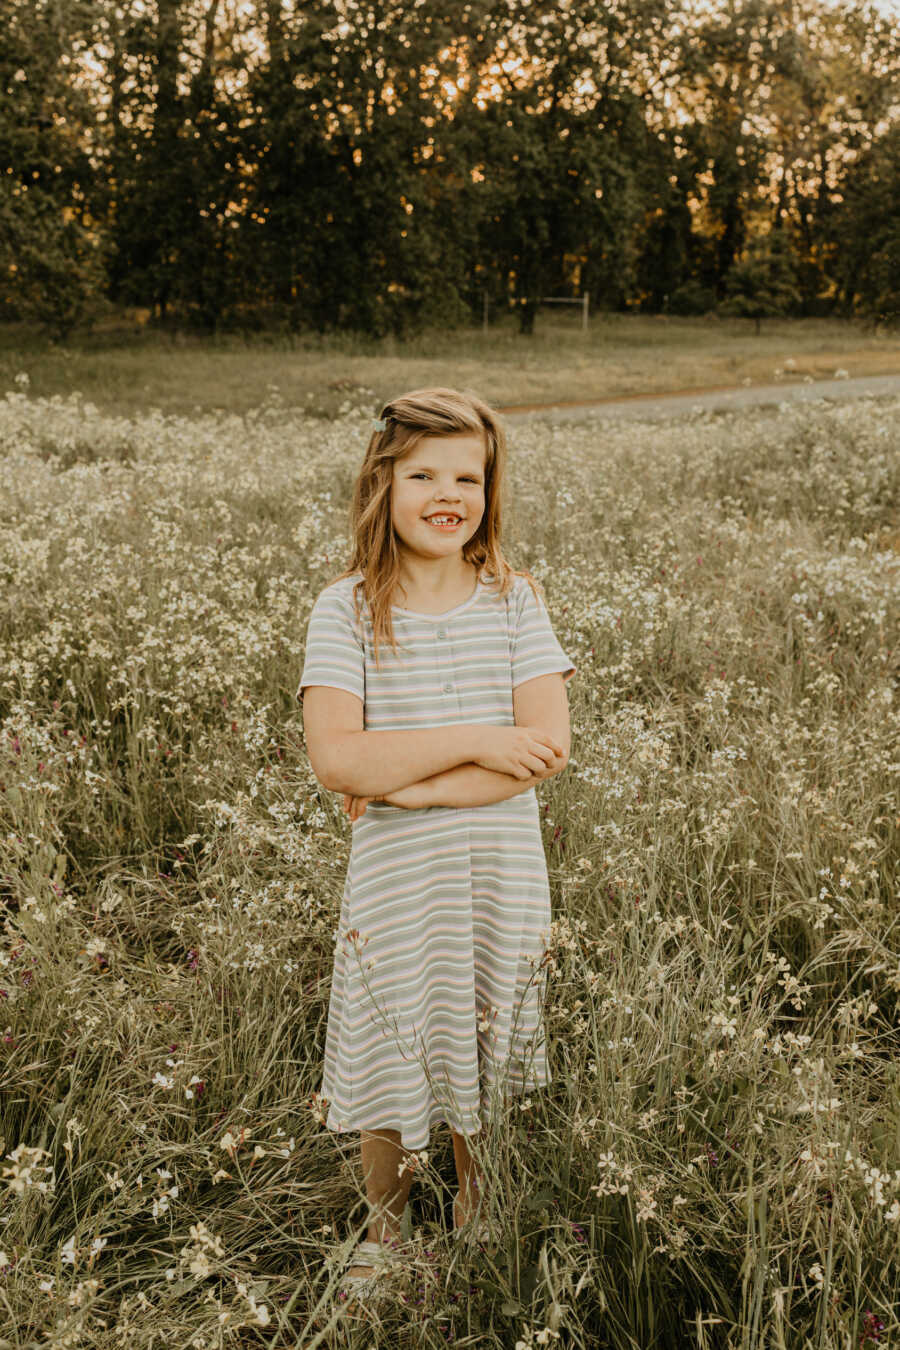 Adopted daughter with craniofacial differences stands with her arms crossed in a field